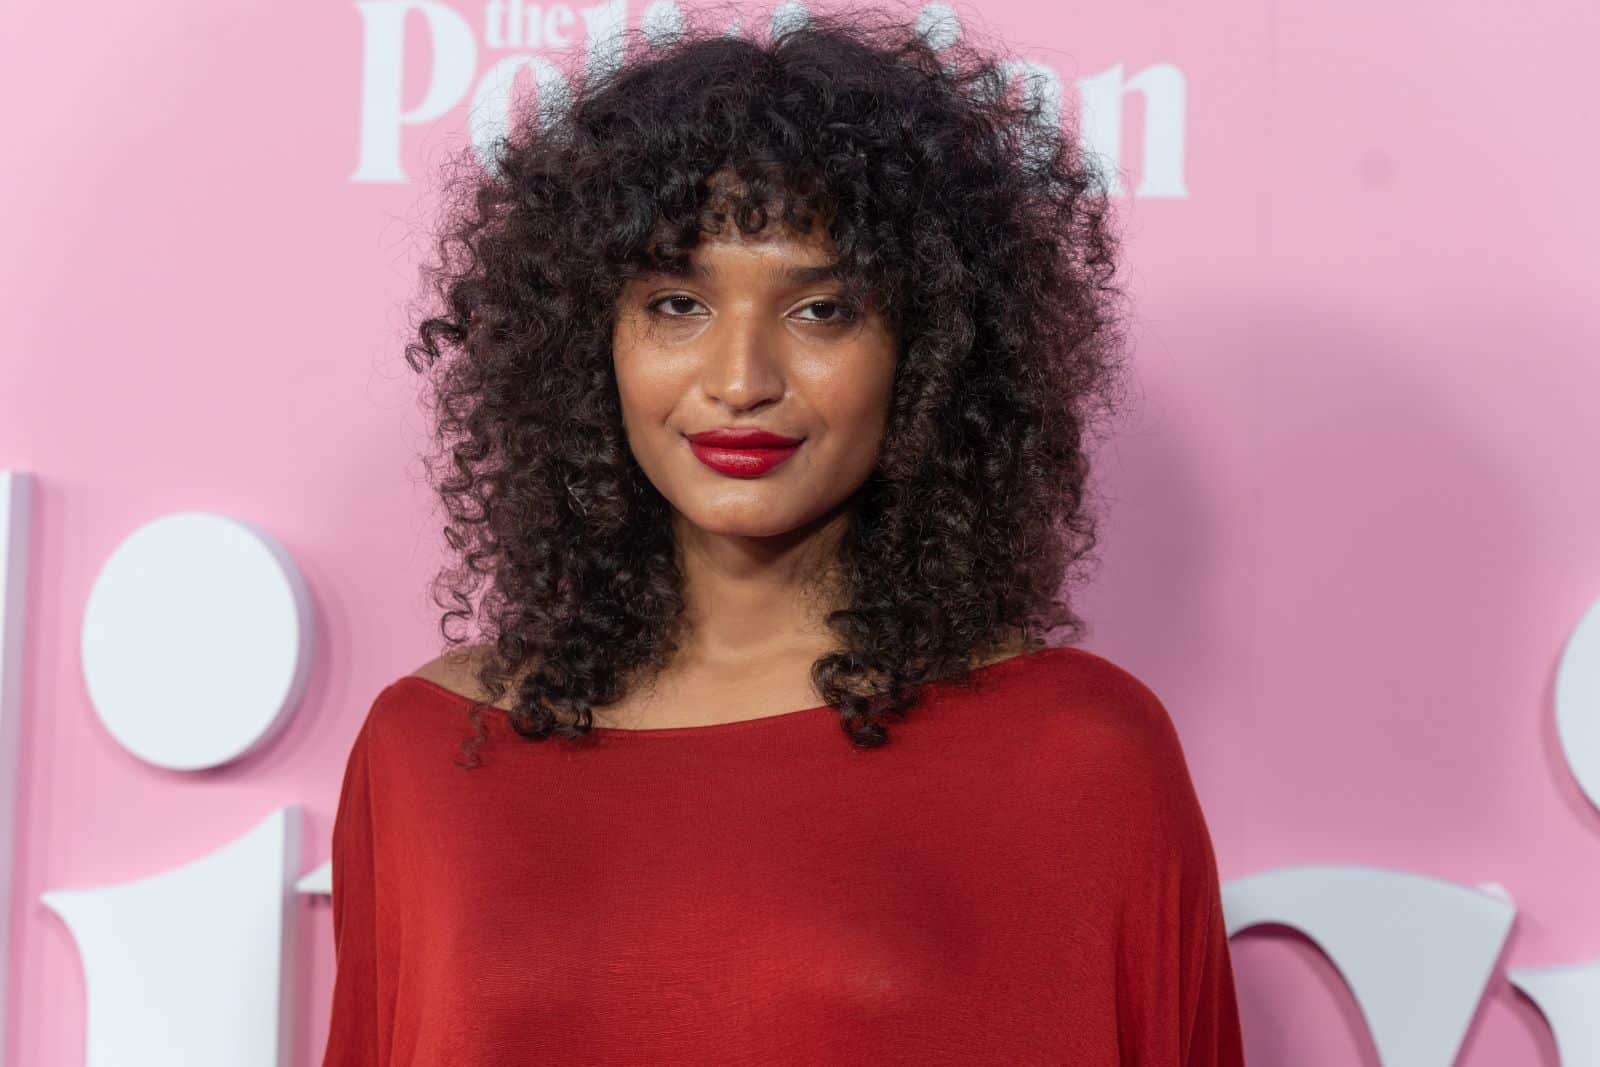 <p class="wp-caption-text">Image Credit: Shutterstock / Ron Adar</p>  <p><span>As one of the stars of “Pose,” Indya Moore has brought visibility to trans people of color. Their portrayal of Angel has been met with critical acclaim, though they’ve encountered transphobia and exclusion. Moore leverages their experiences to speak out against violence and discrimination, becoming a powerful voice for change.</span></p>